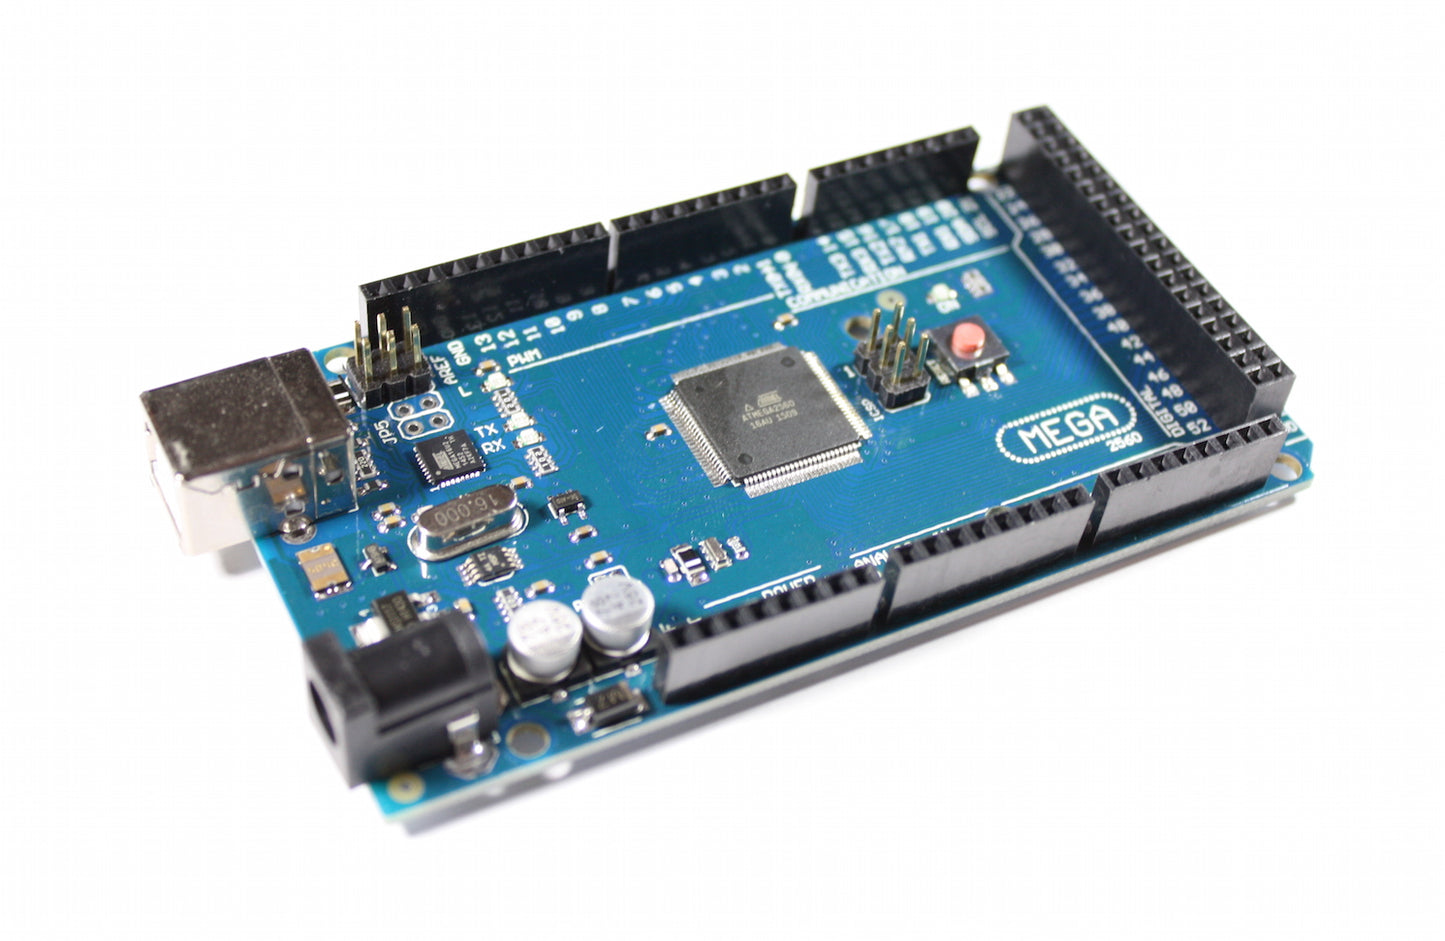 Mega 2560 R3 Module with ATmega2560 and USB-Cable, 5V, 16MHz, Arduino compatible